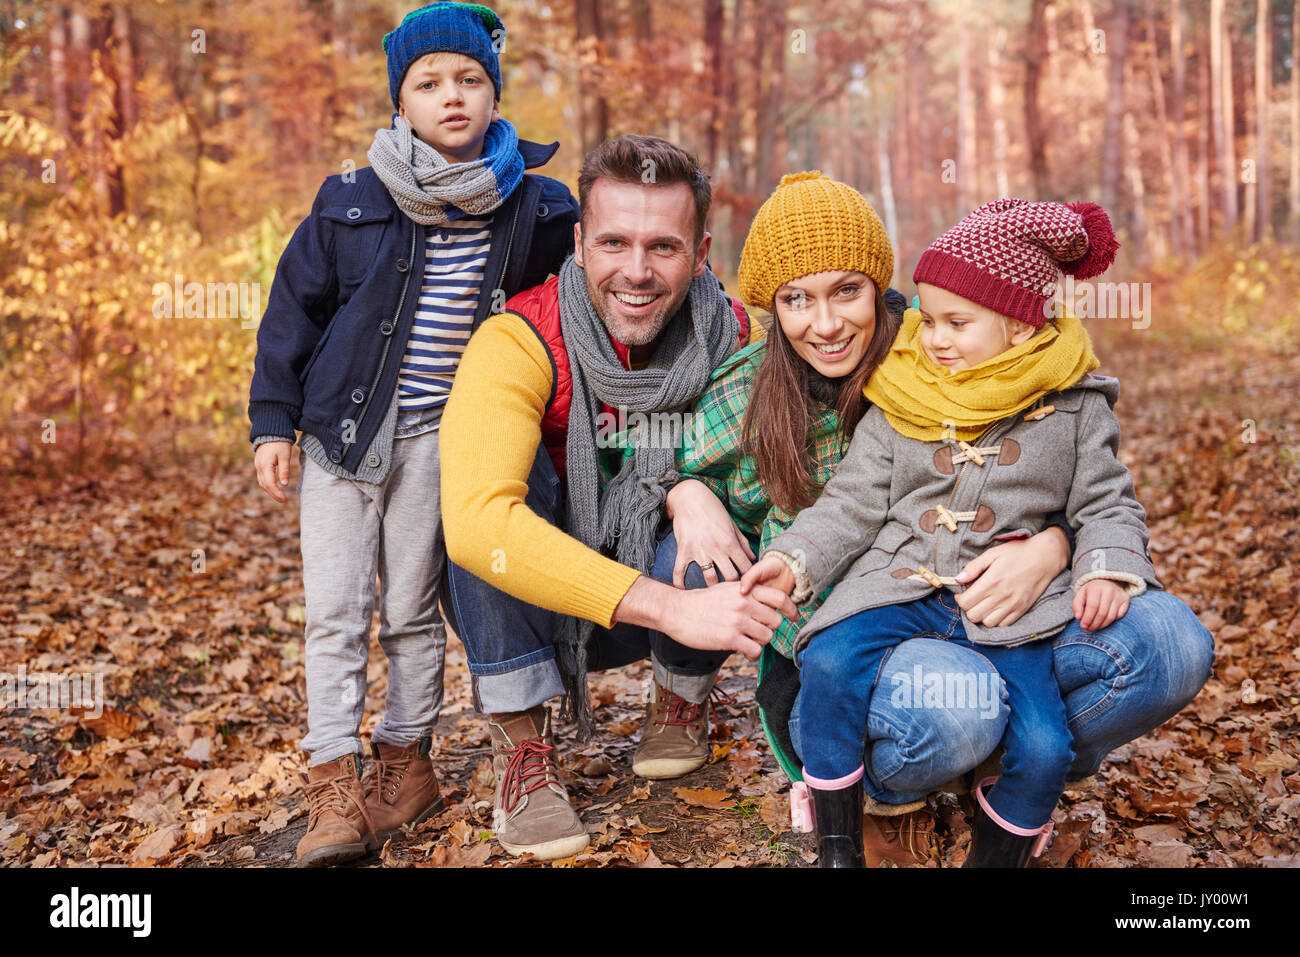 Spending time on fresh air with family Stock Photo